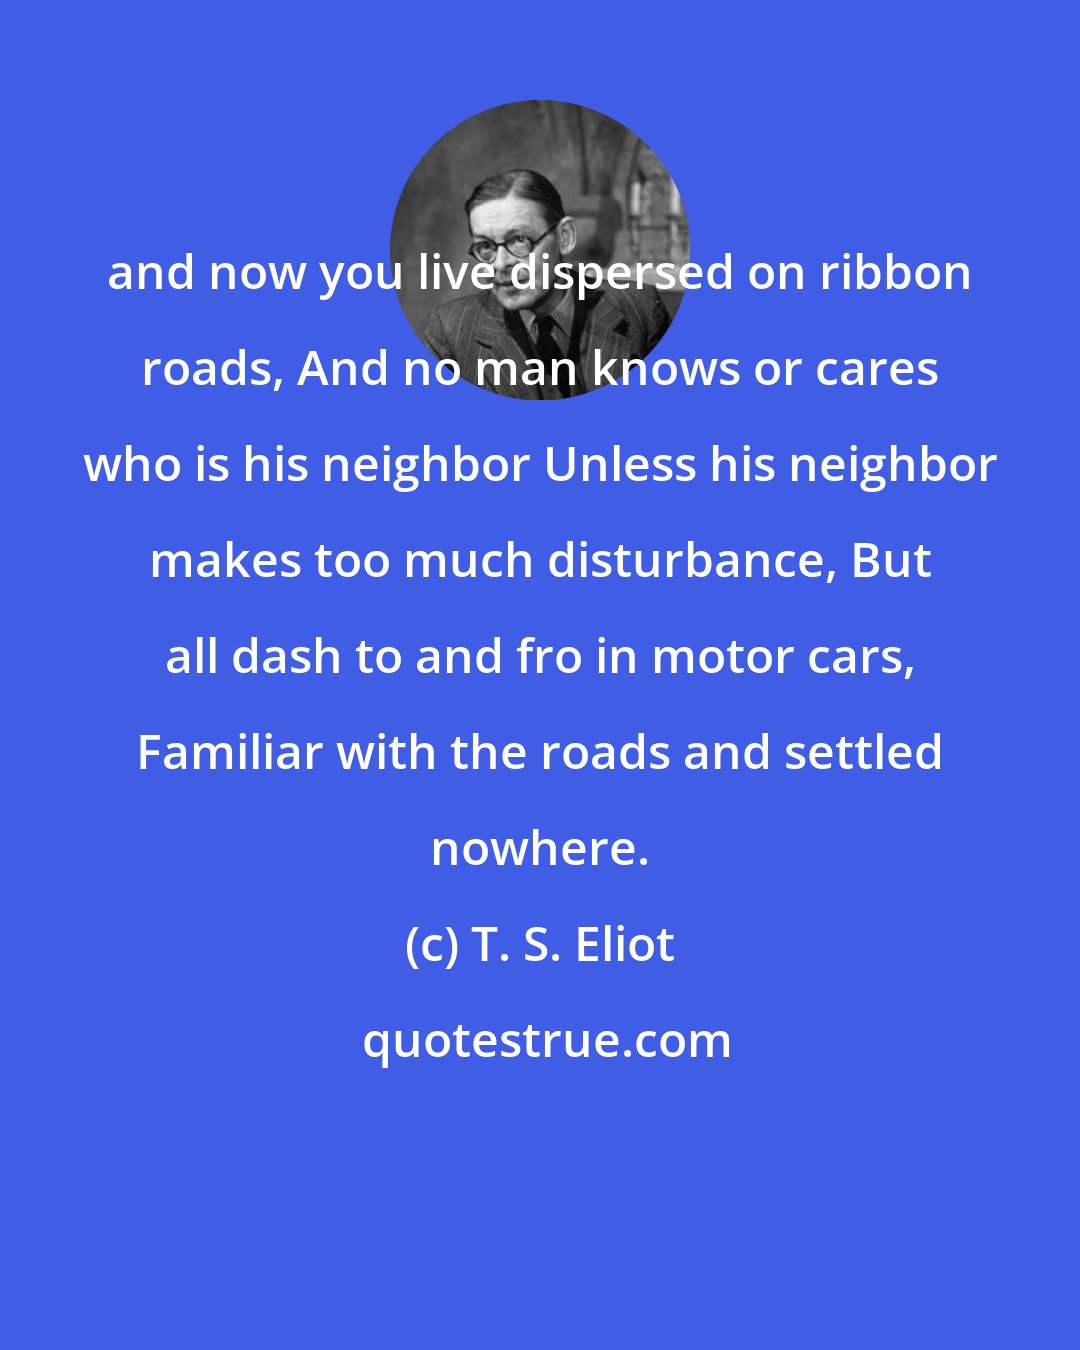 T. S. Eliot: and now you live dispersed on ribbon roads, And no man knows or cares who is his neighbor Unless his neighbor makes too much disturbance, But all dash to and fro in motor cars, Familiar with the roads and settled nowhere.